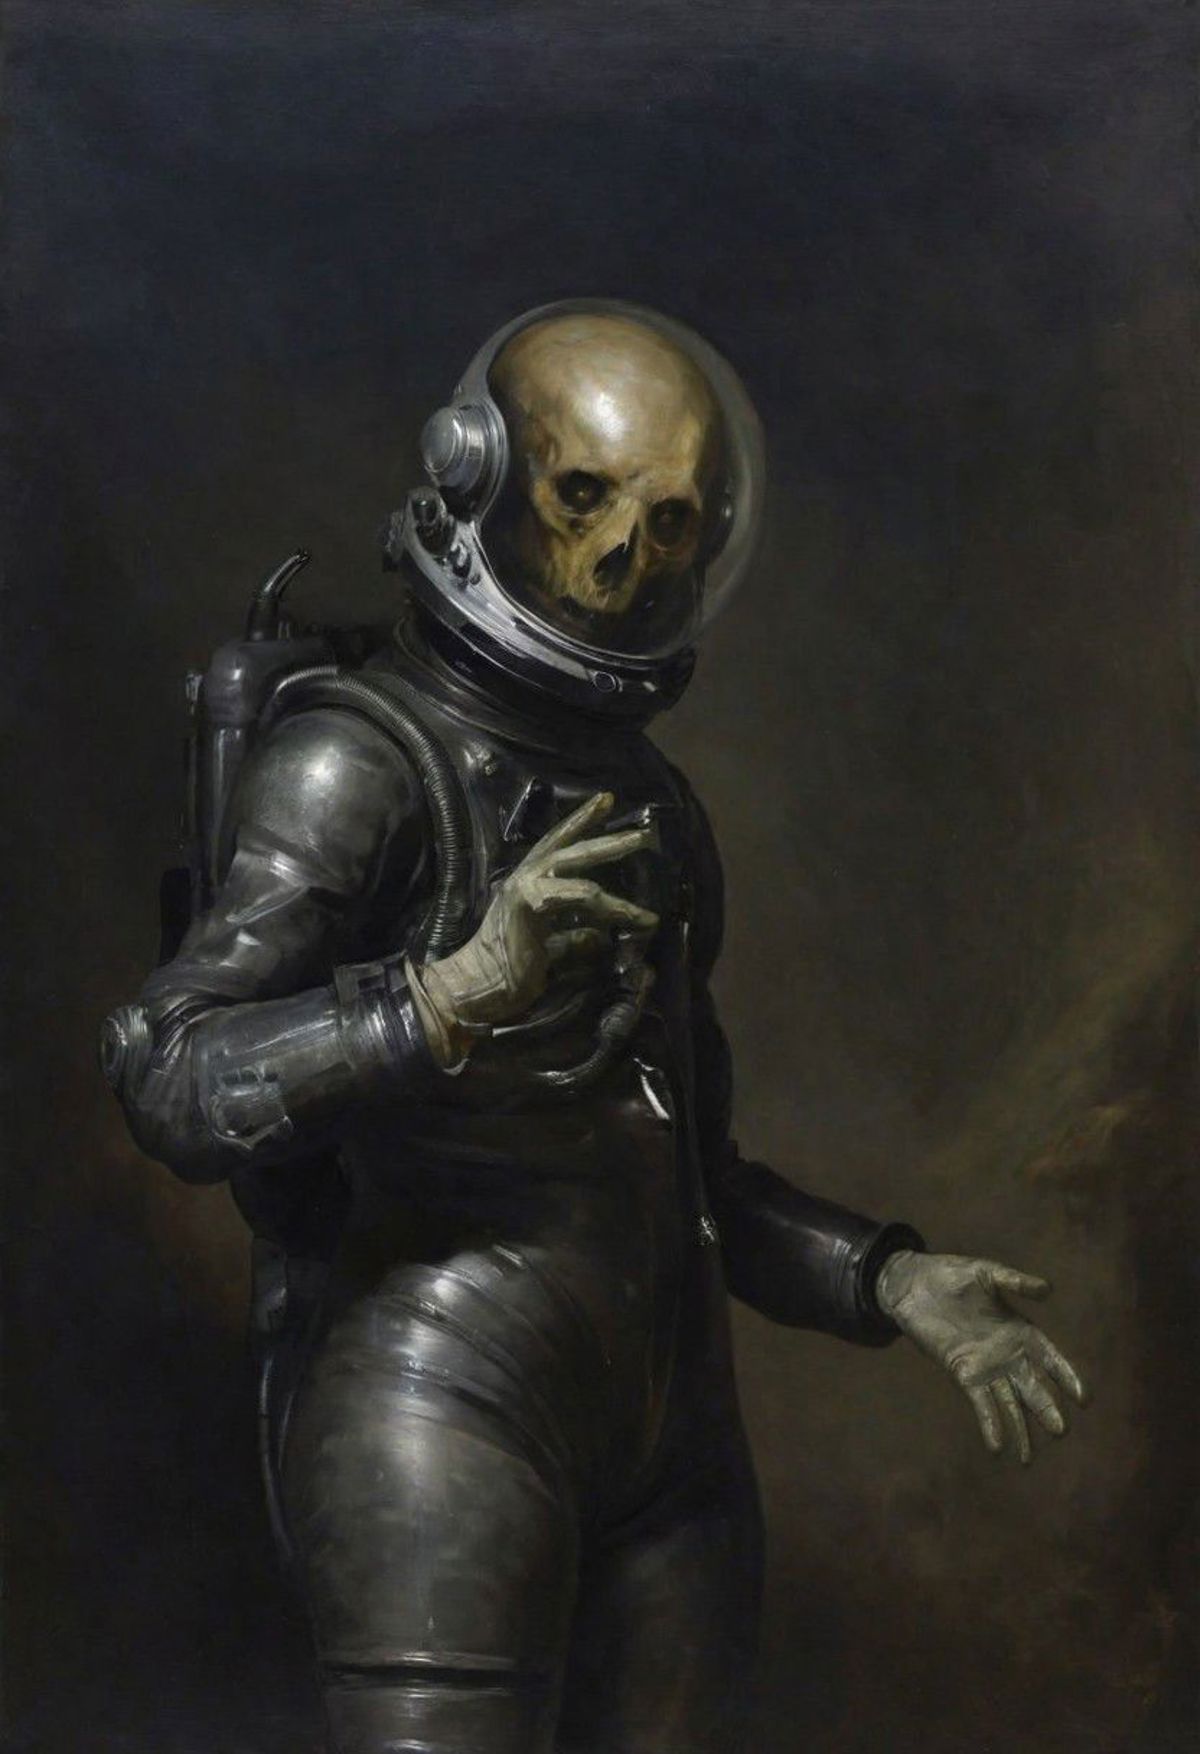 A Skeleton Astronaut in a Spacesuit with a Helmet and Gloves, Reaching for Something